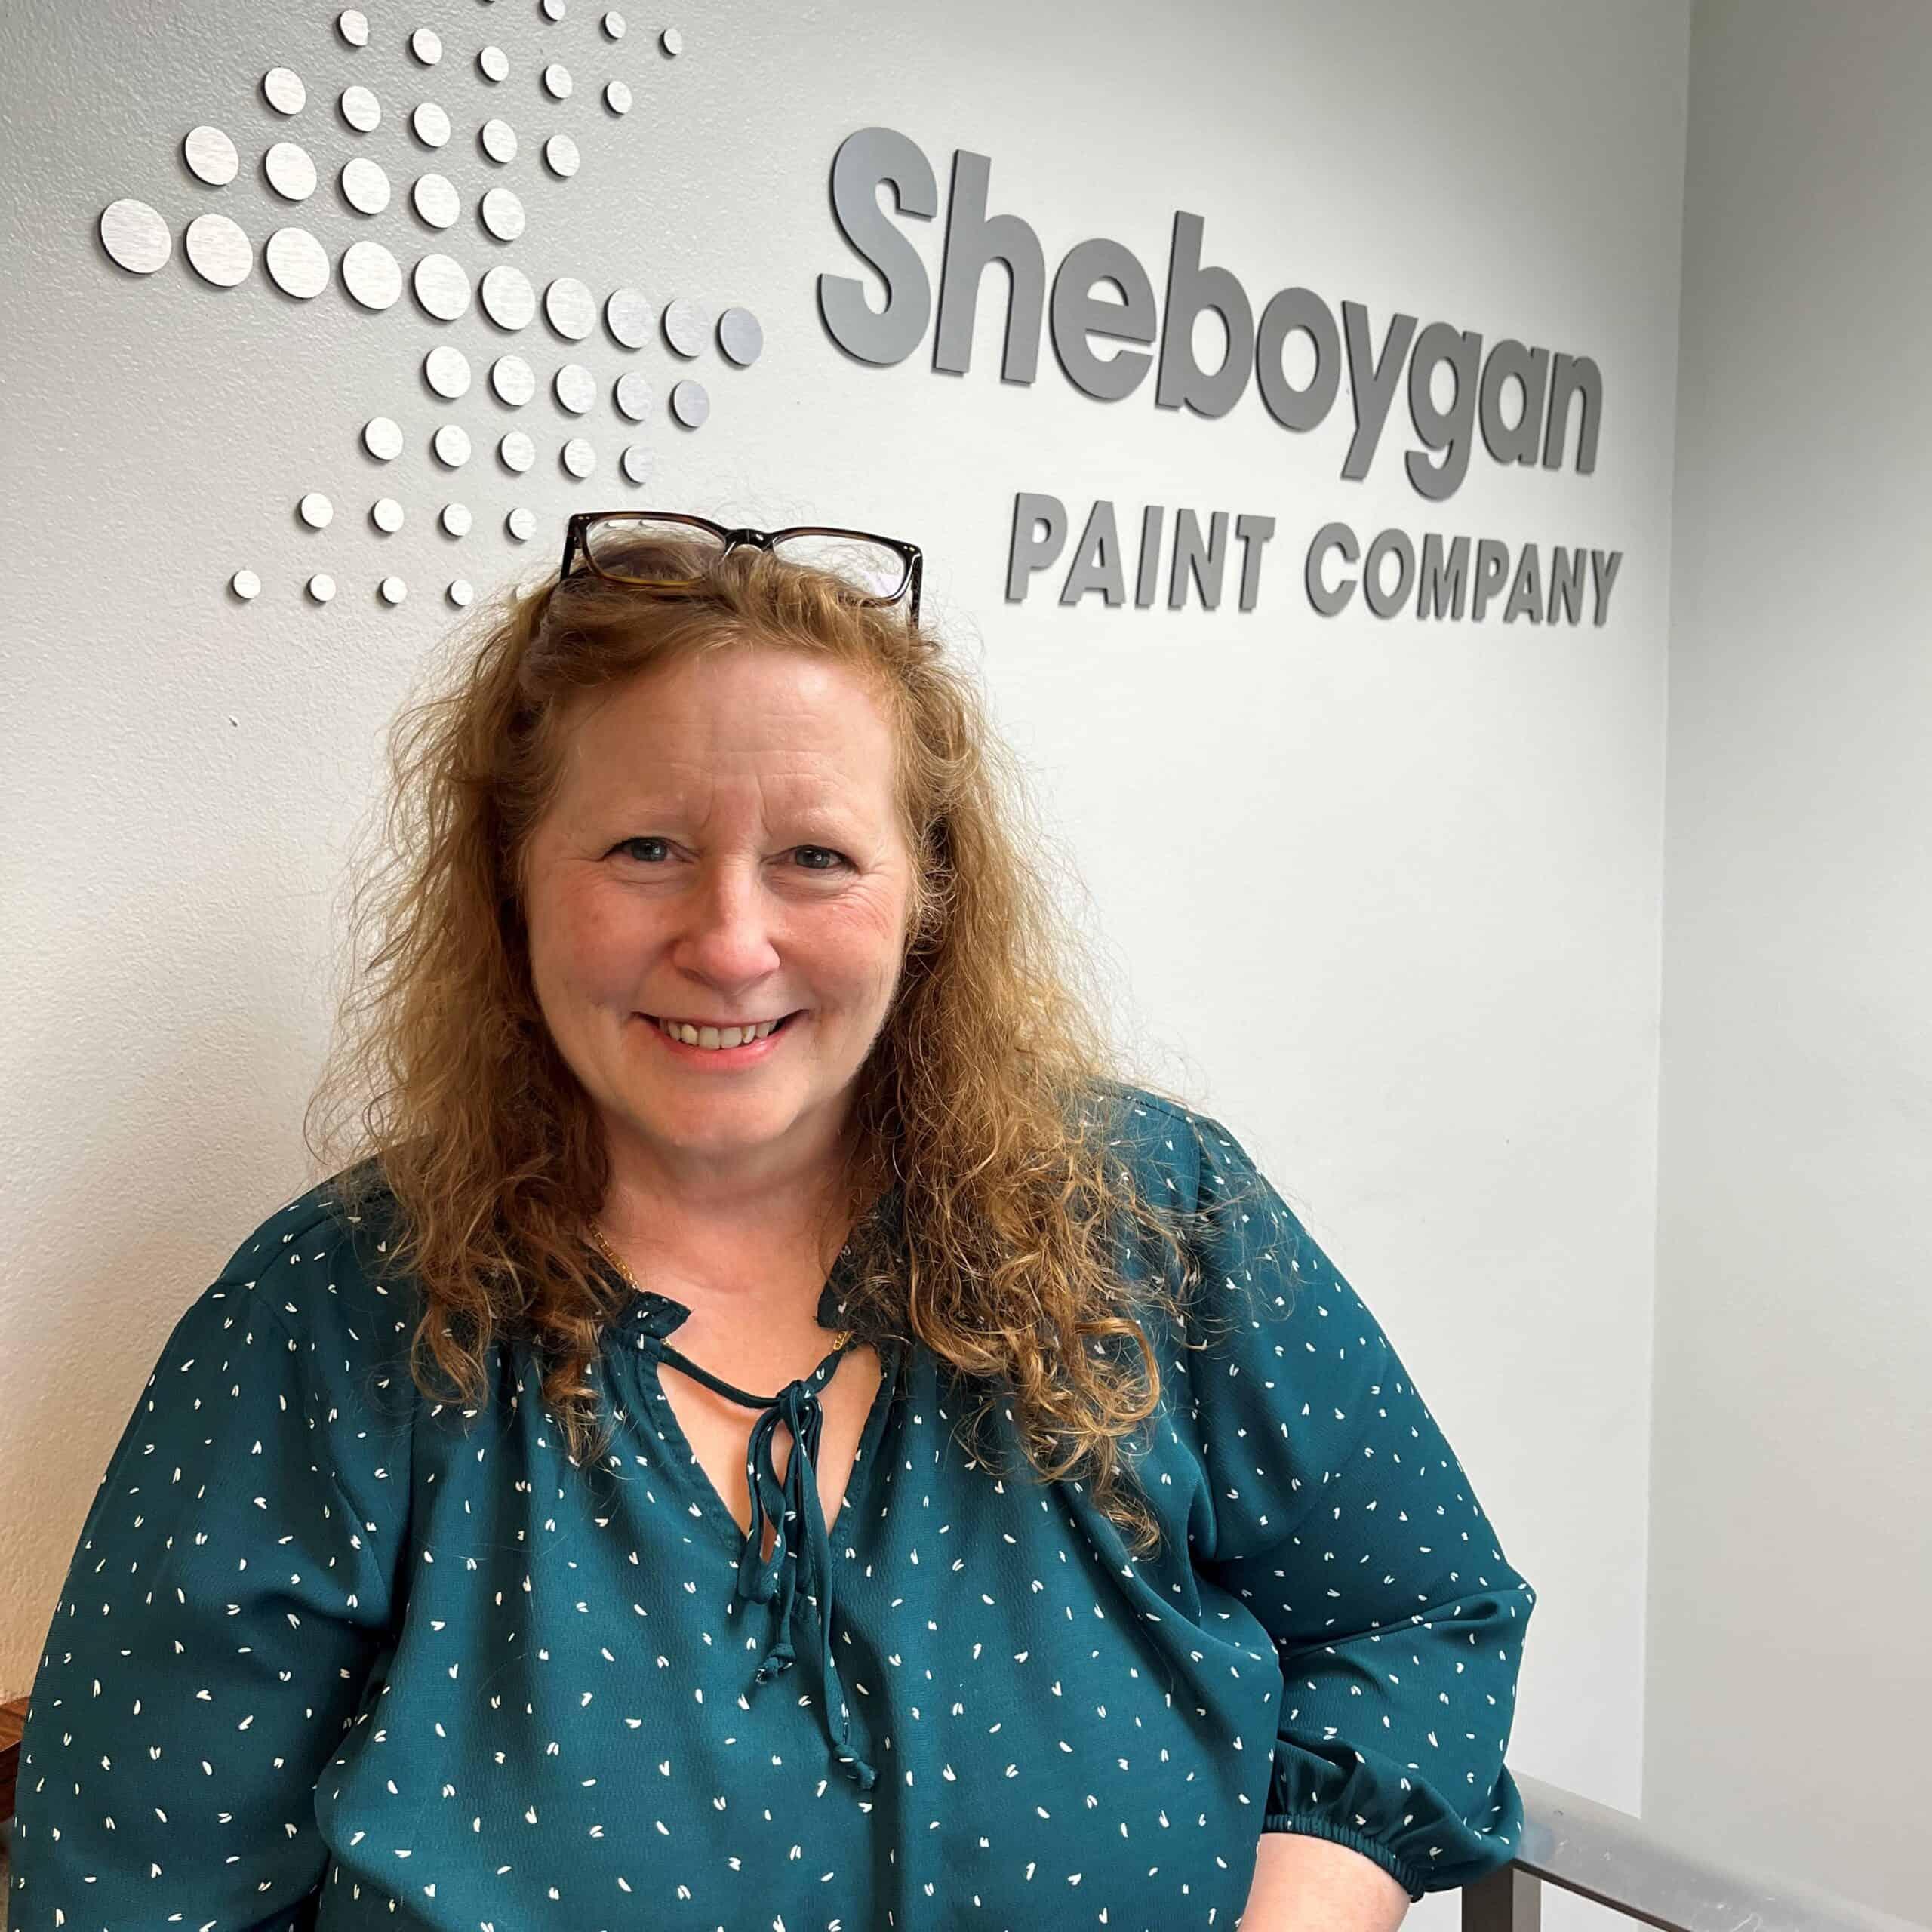 Product Sheboygan Paint Company Appoints Product Manager - Sheboygan Paint Company image